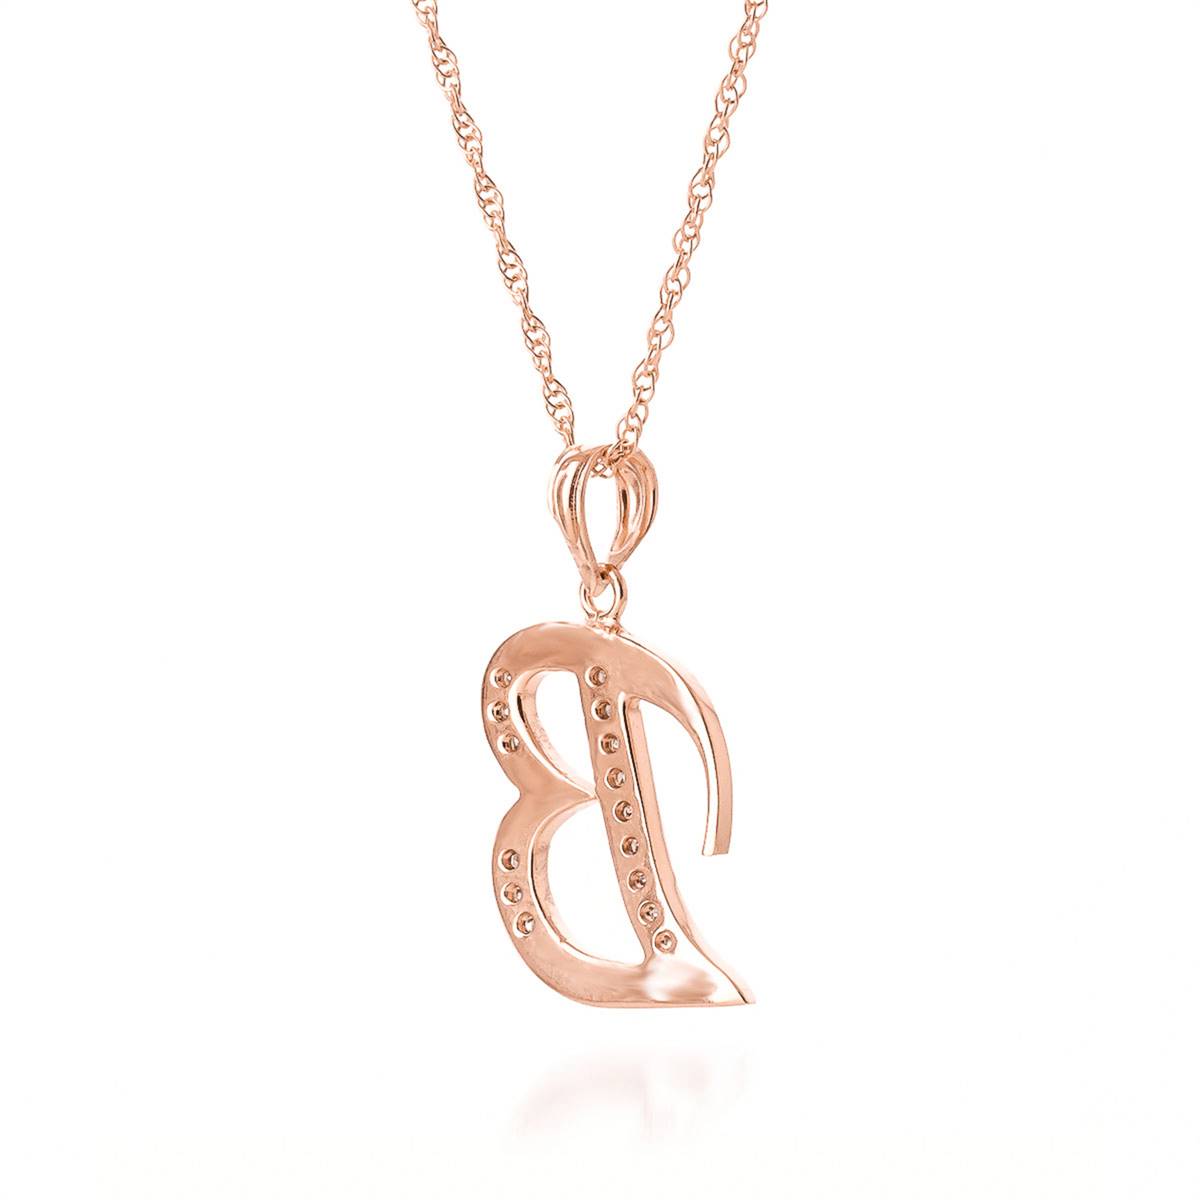 14K Solid Rose Gold Necklace w/ Natural Diamonds Initial 'b' Pendant